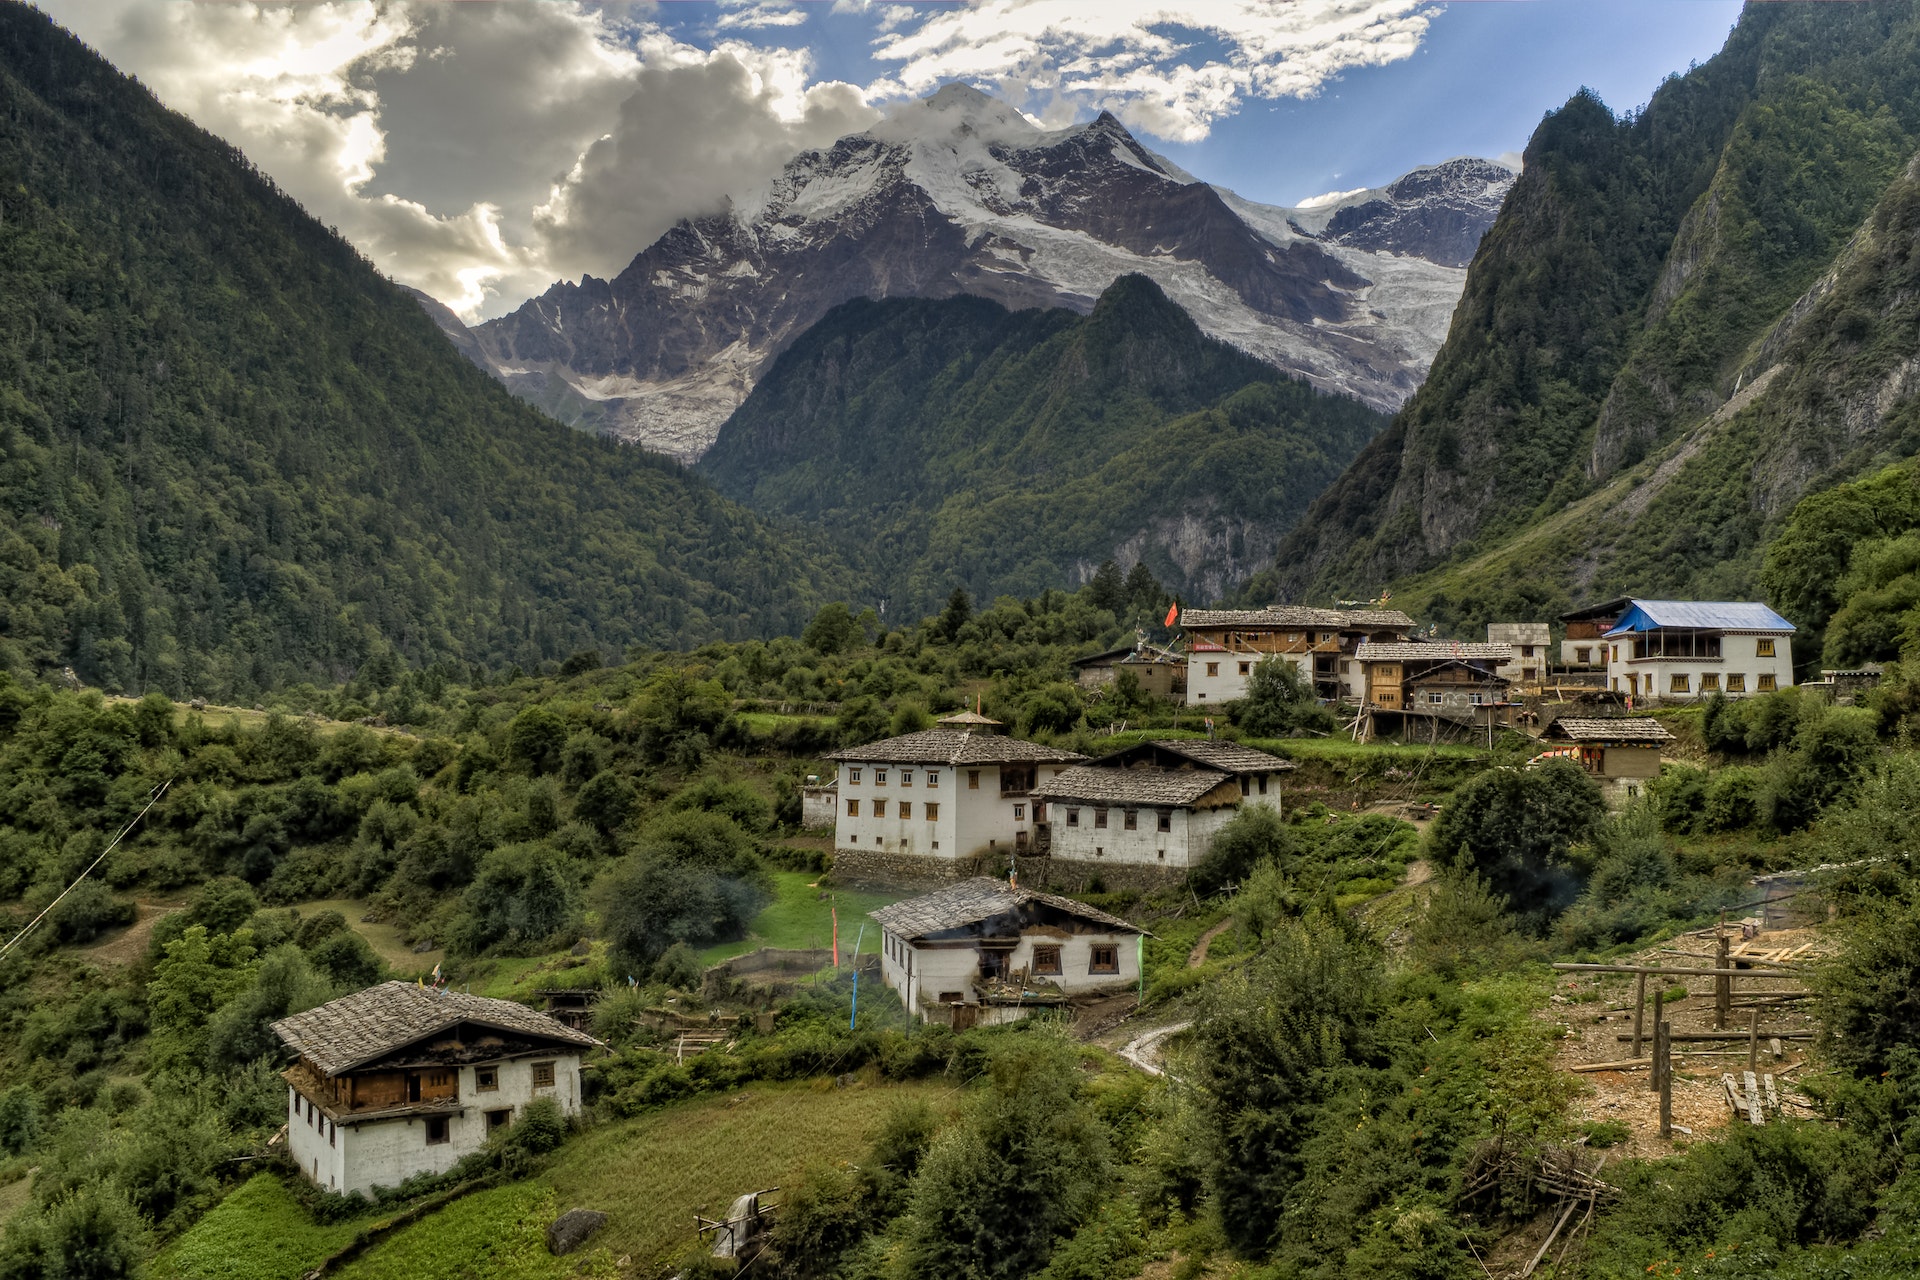 Best Trekking and Tours Destinations in Nepal